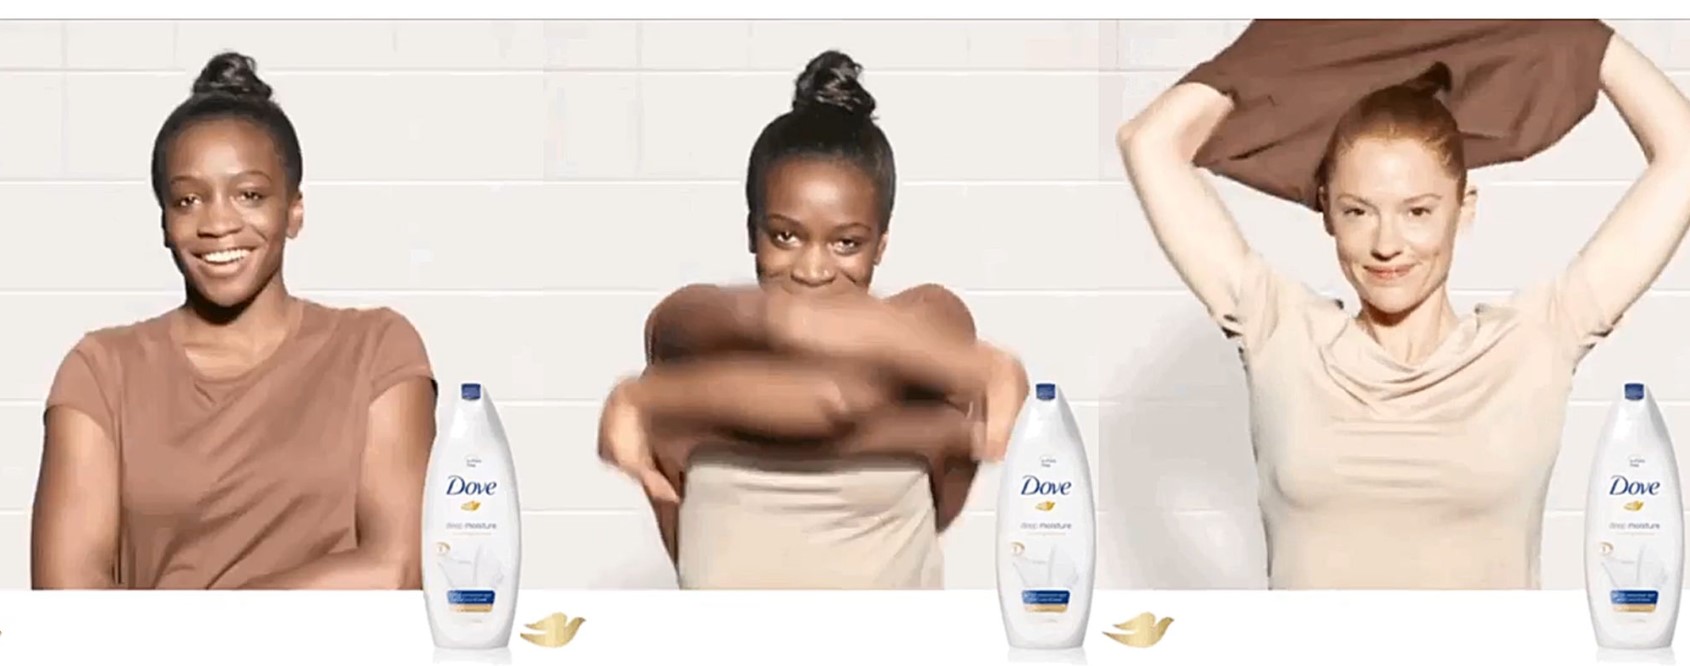 How to start an e-commerce business: ad fail by Dove